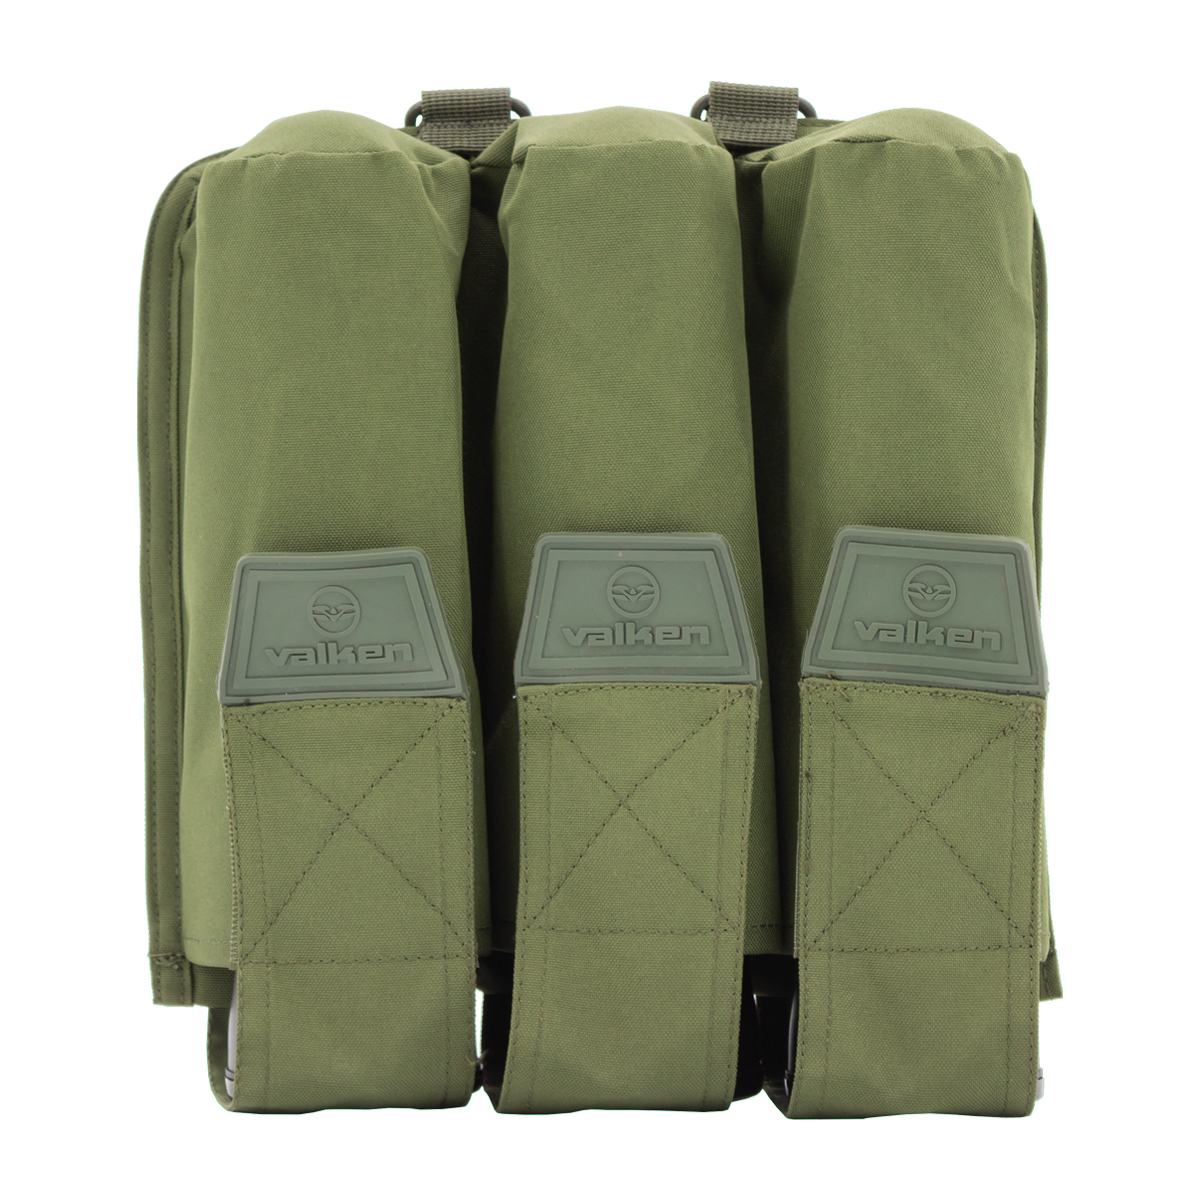 MOLLE Fishing Pouches!